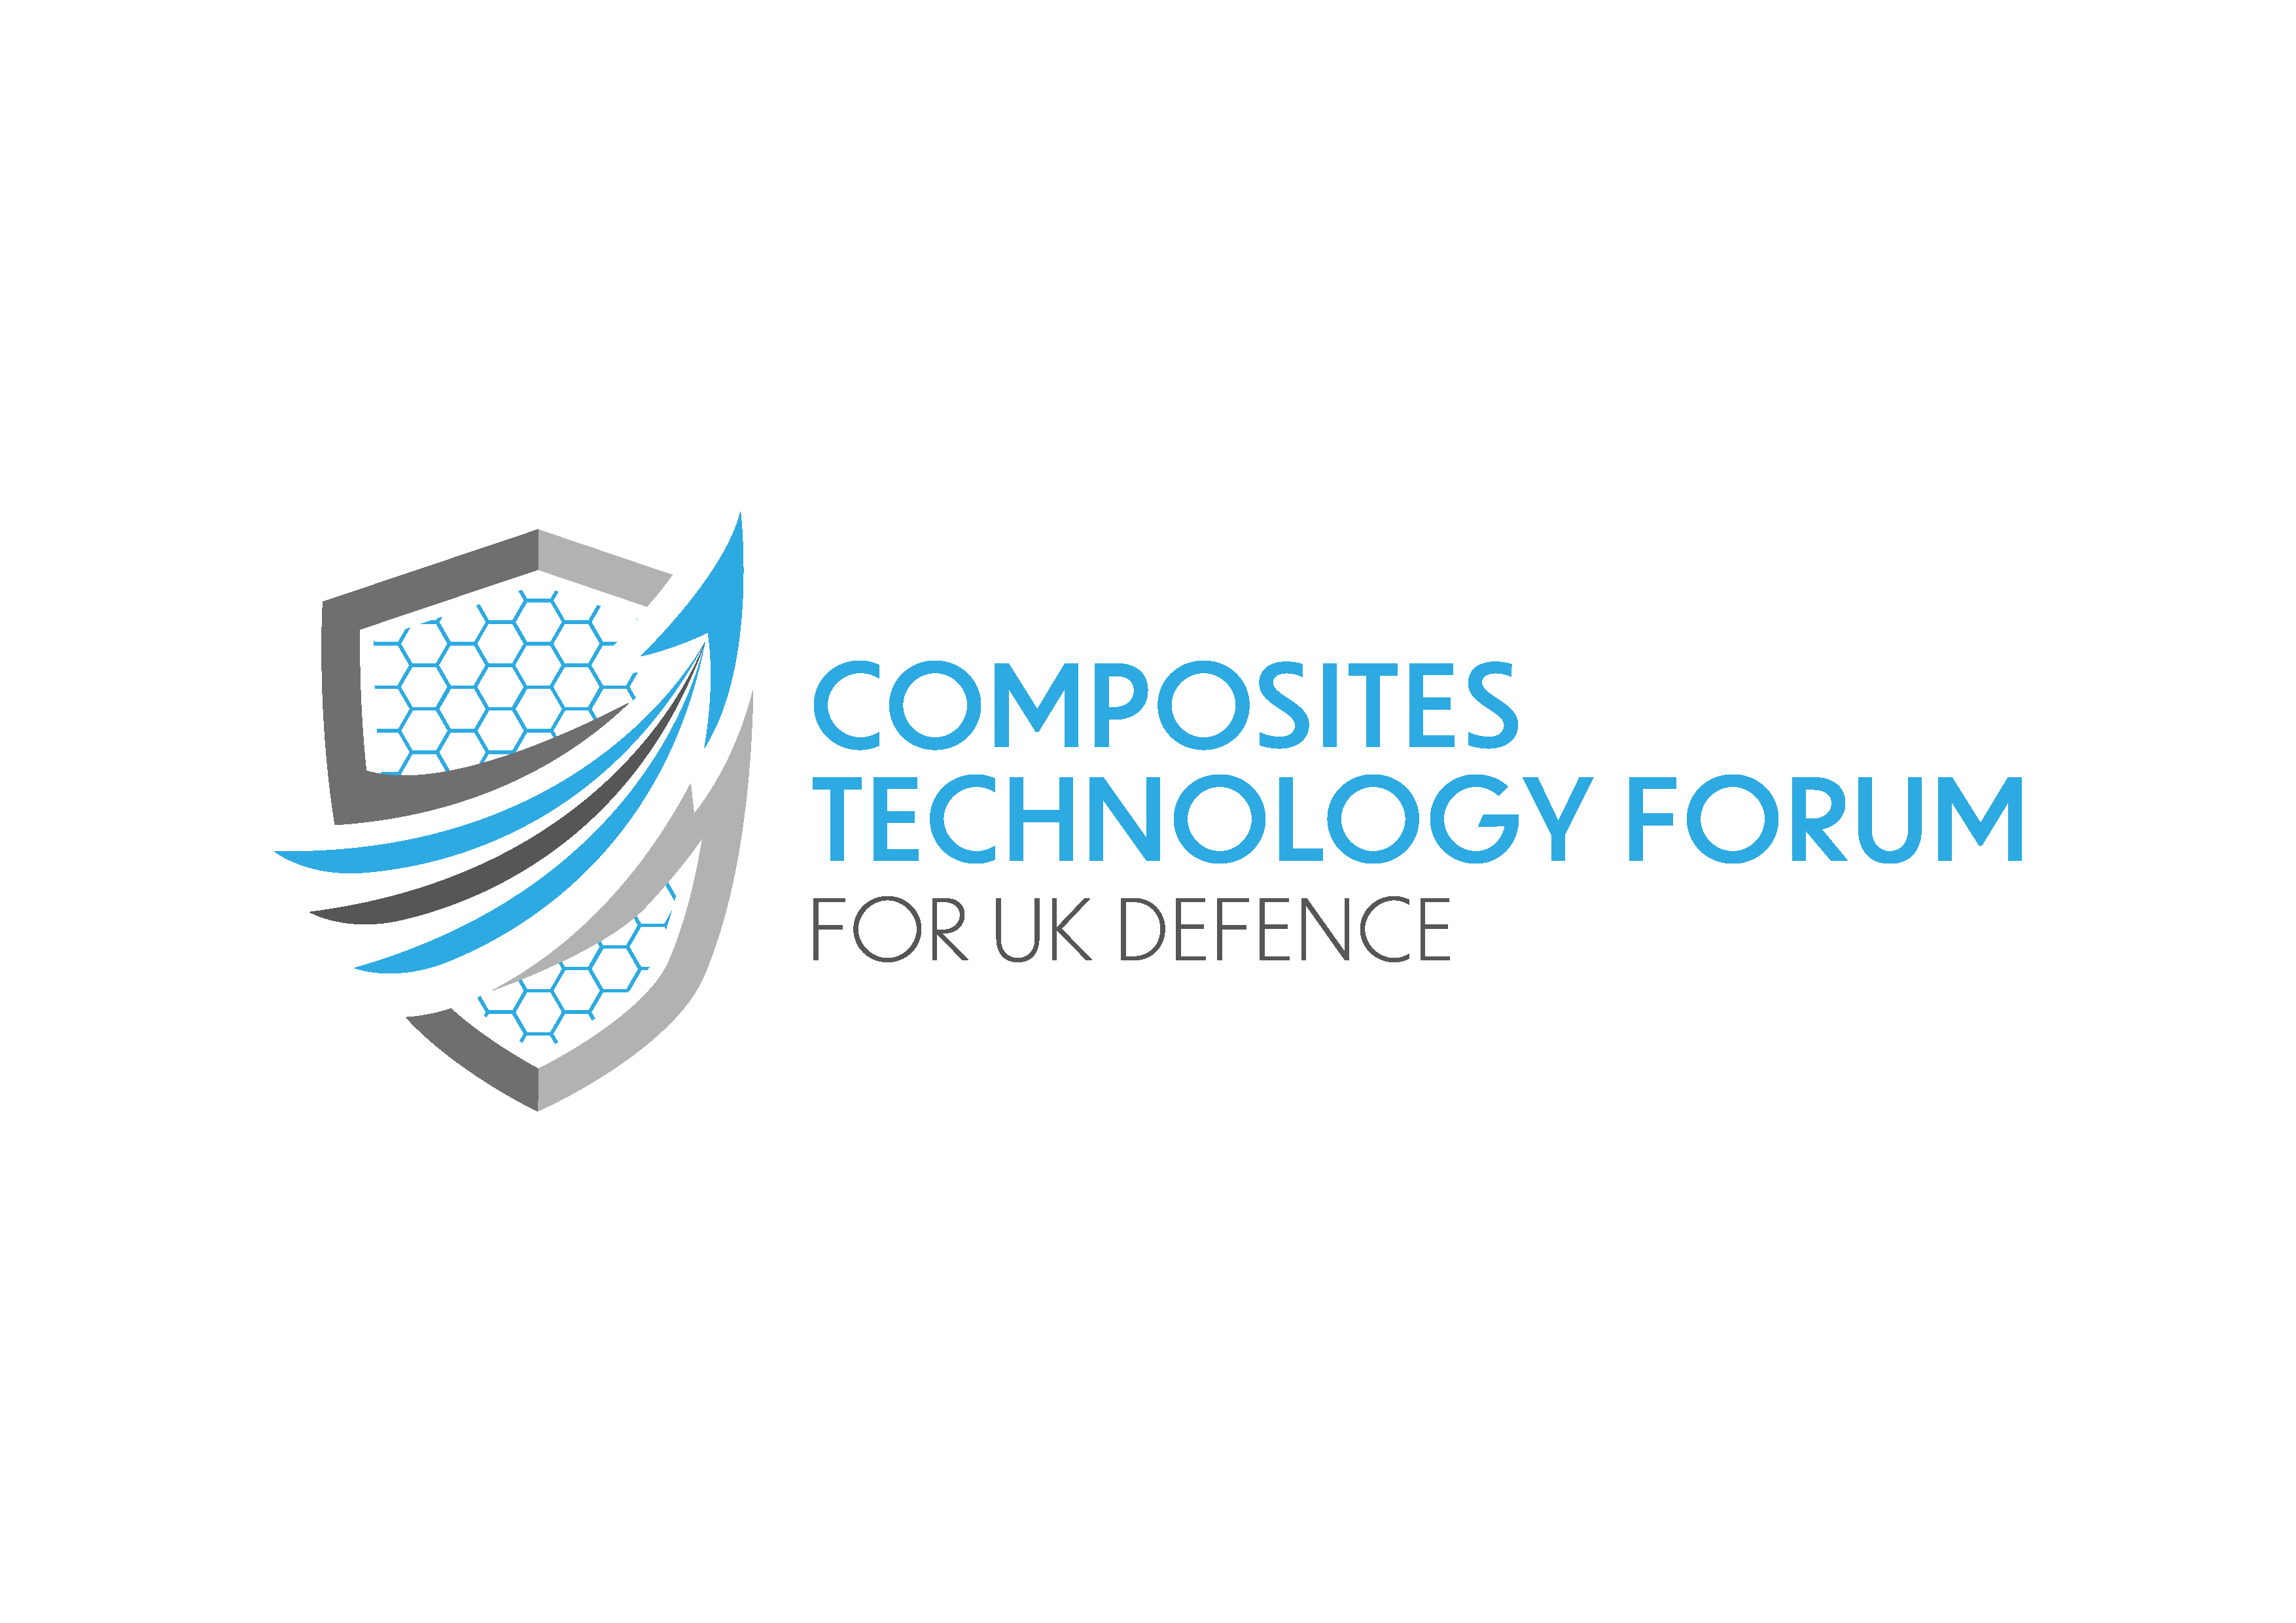 Composites tech forum for UK defence